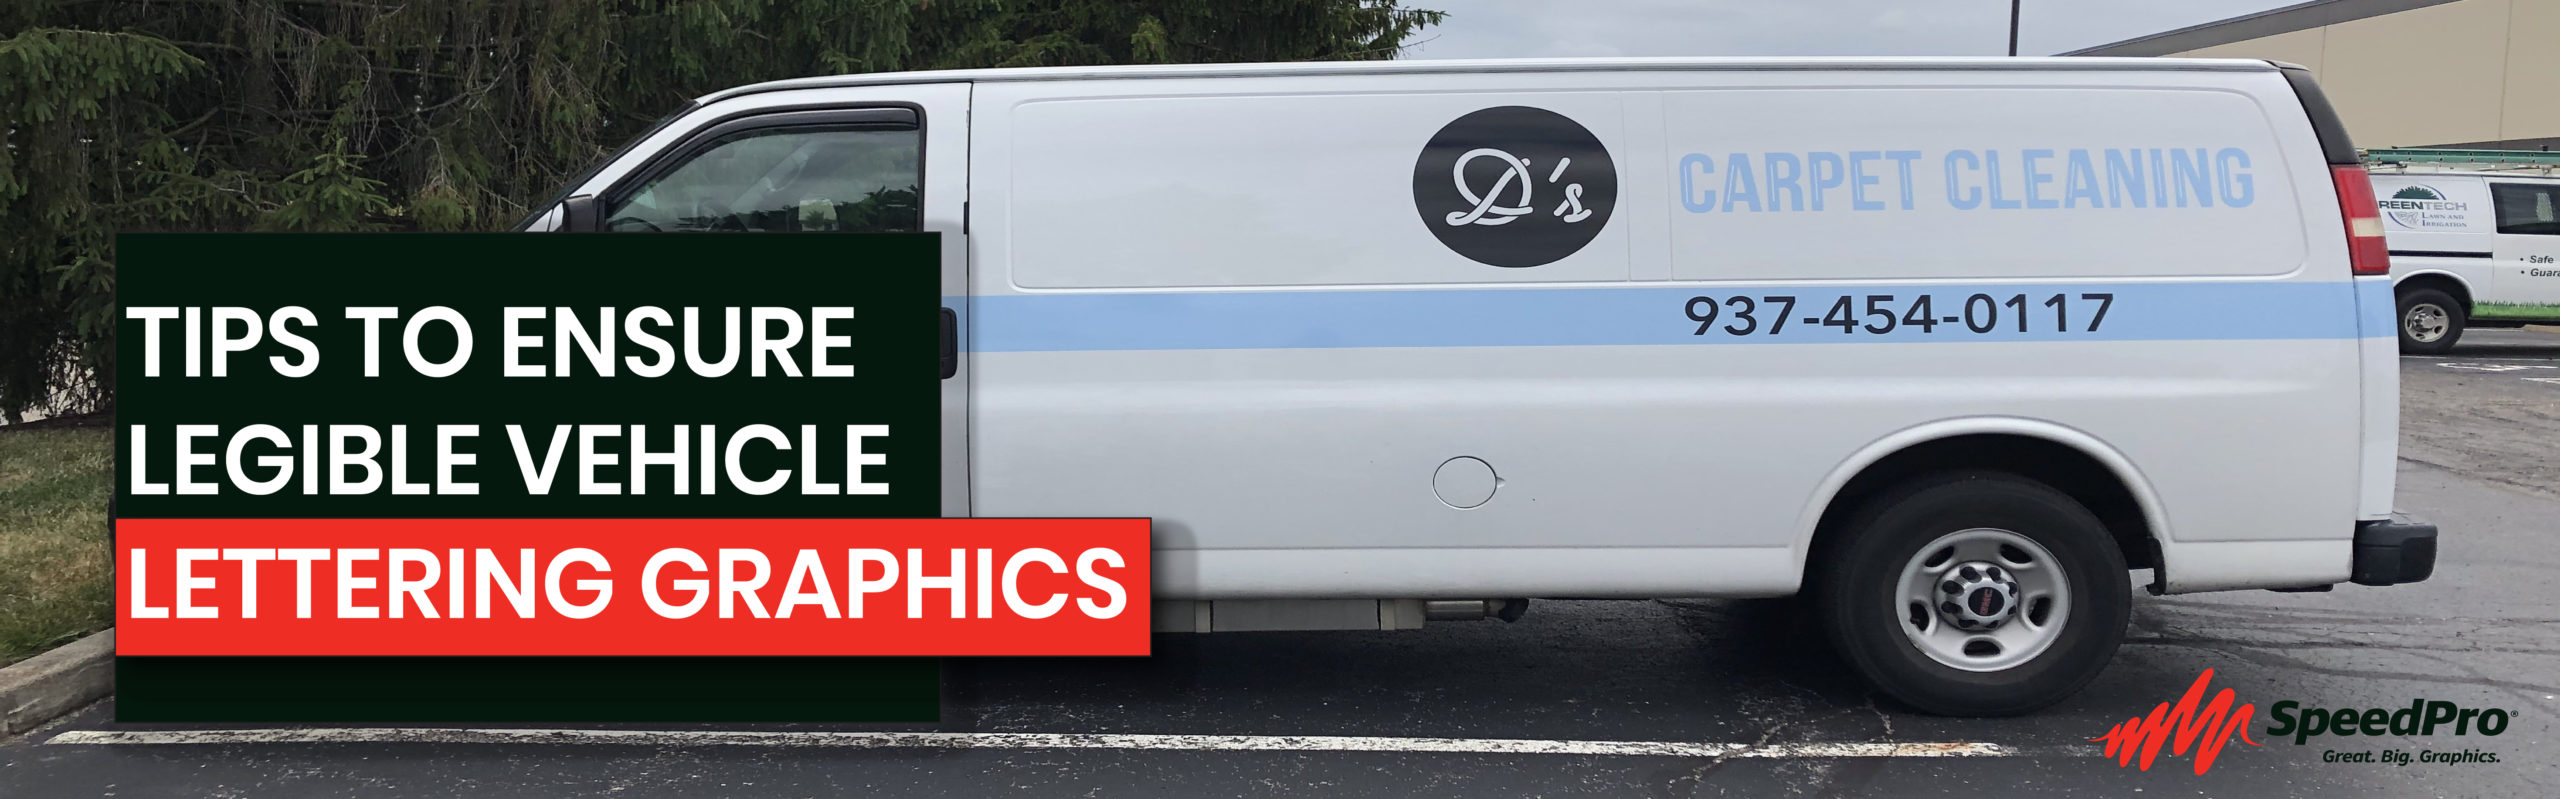 Tips to Ensure Legible Vehicle Lettering Graphics